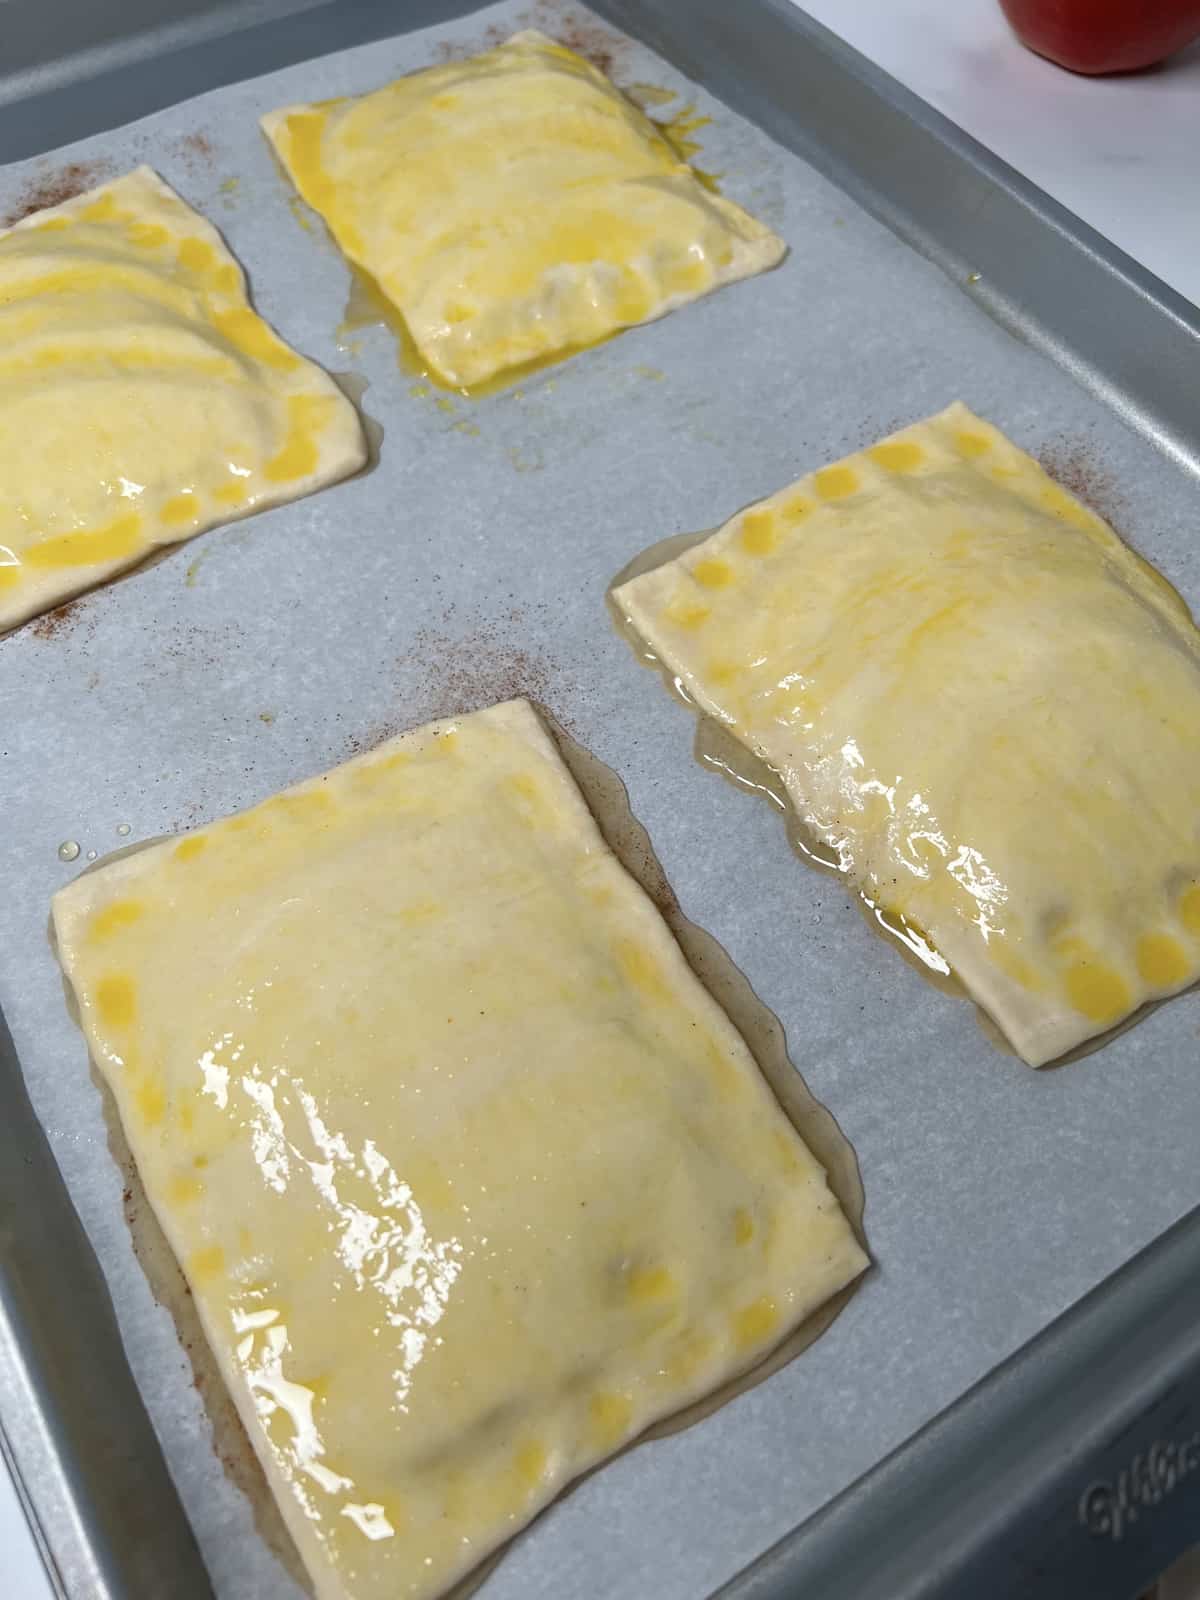 Cover apples with puff pastry rectangles and brush with egg wash.